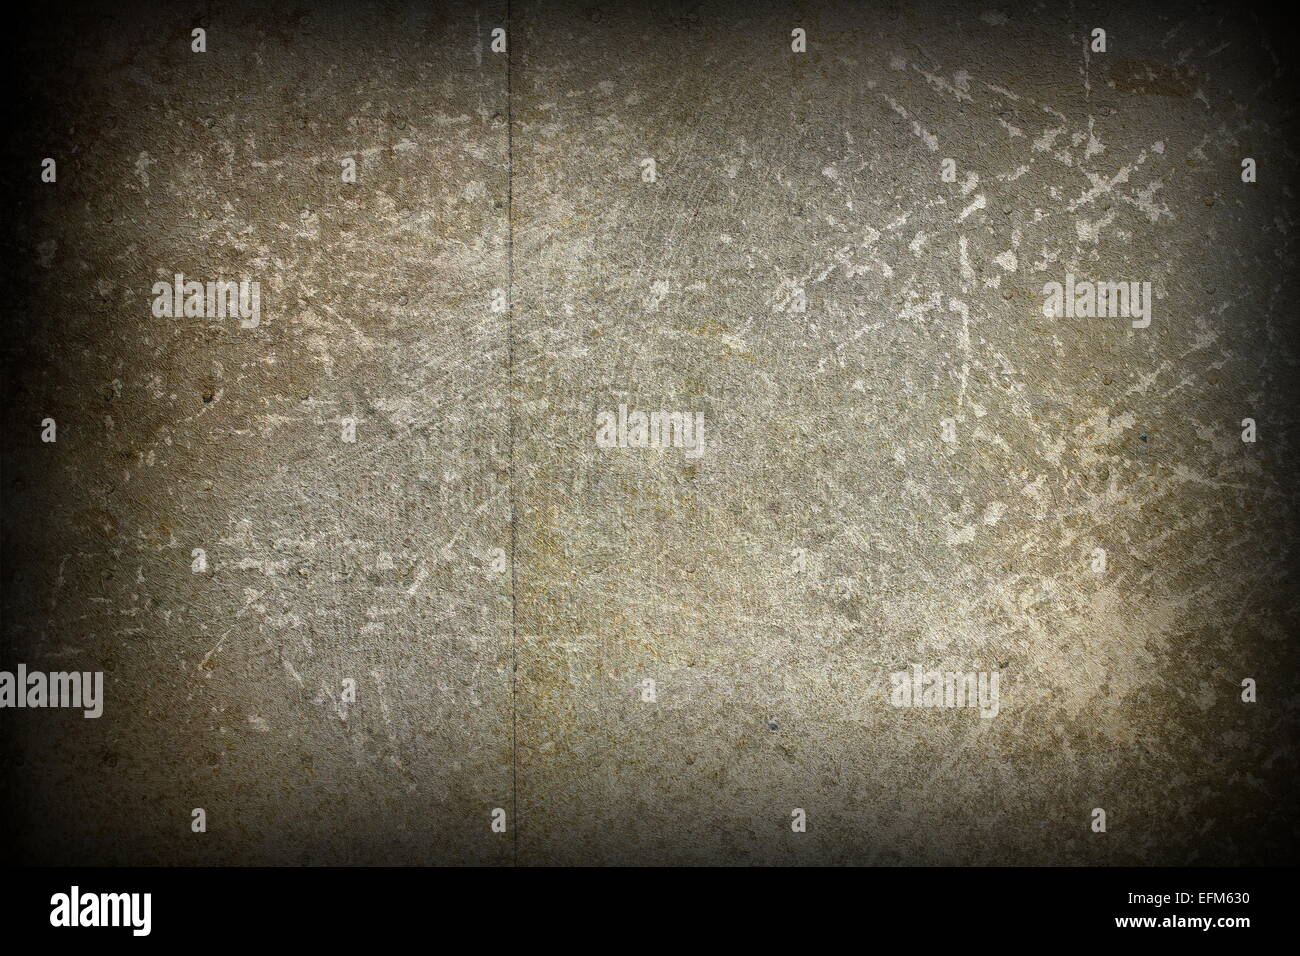 grungy old metal surface, interesting distressed background Stock Photo